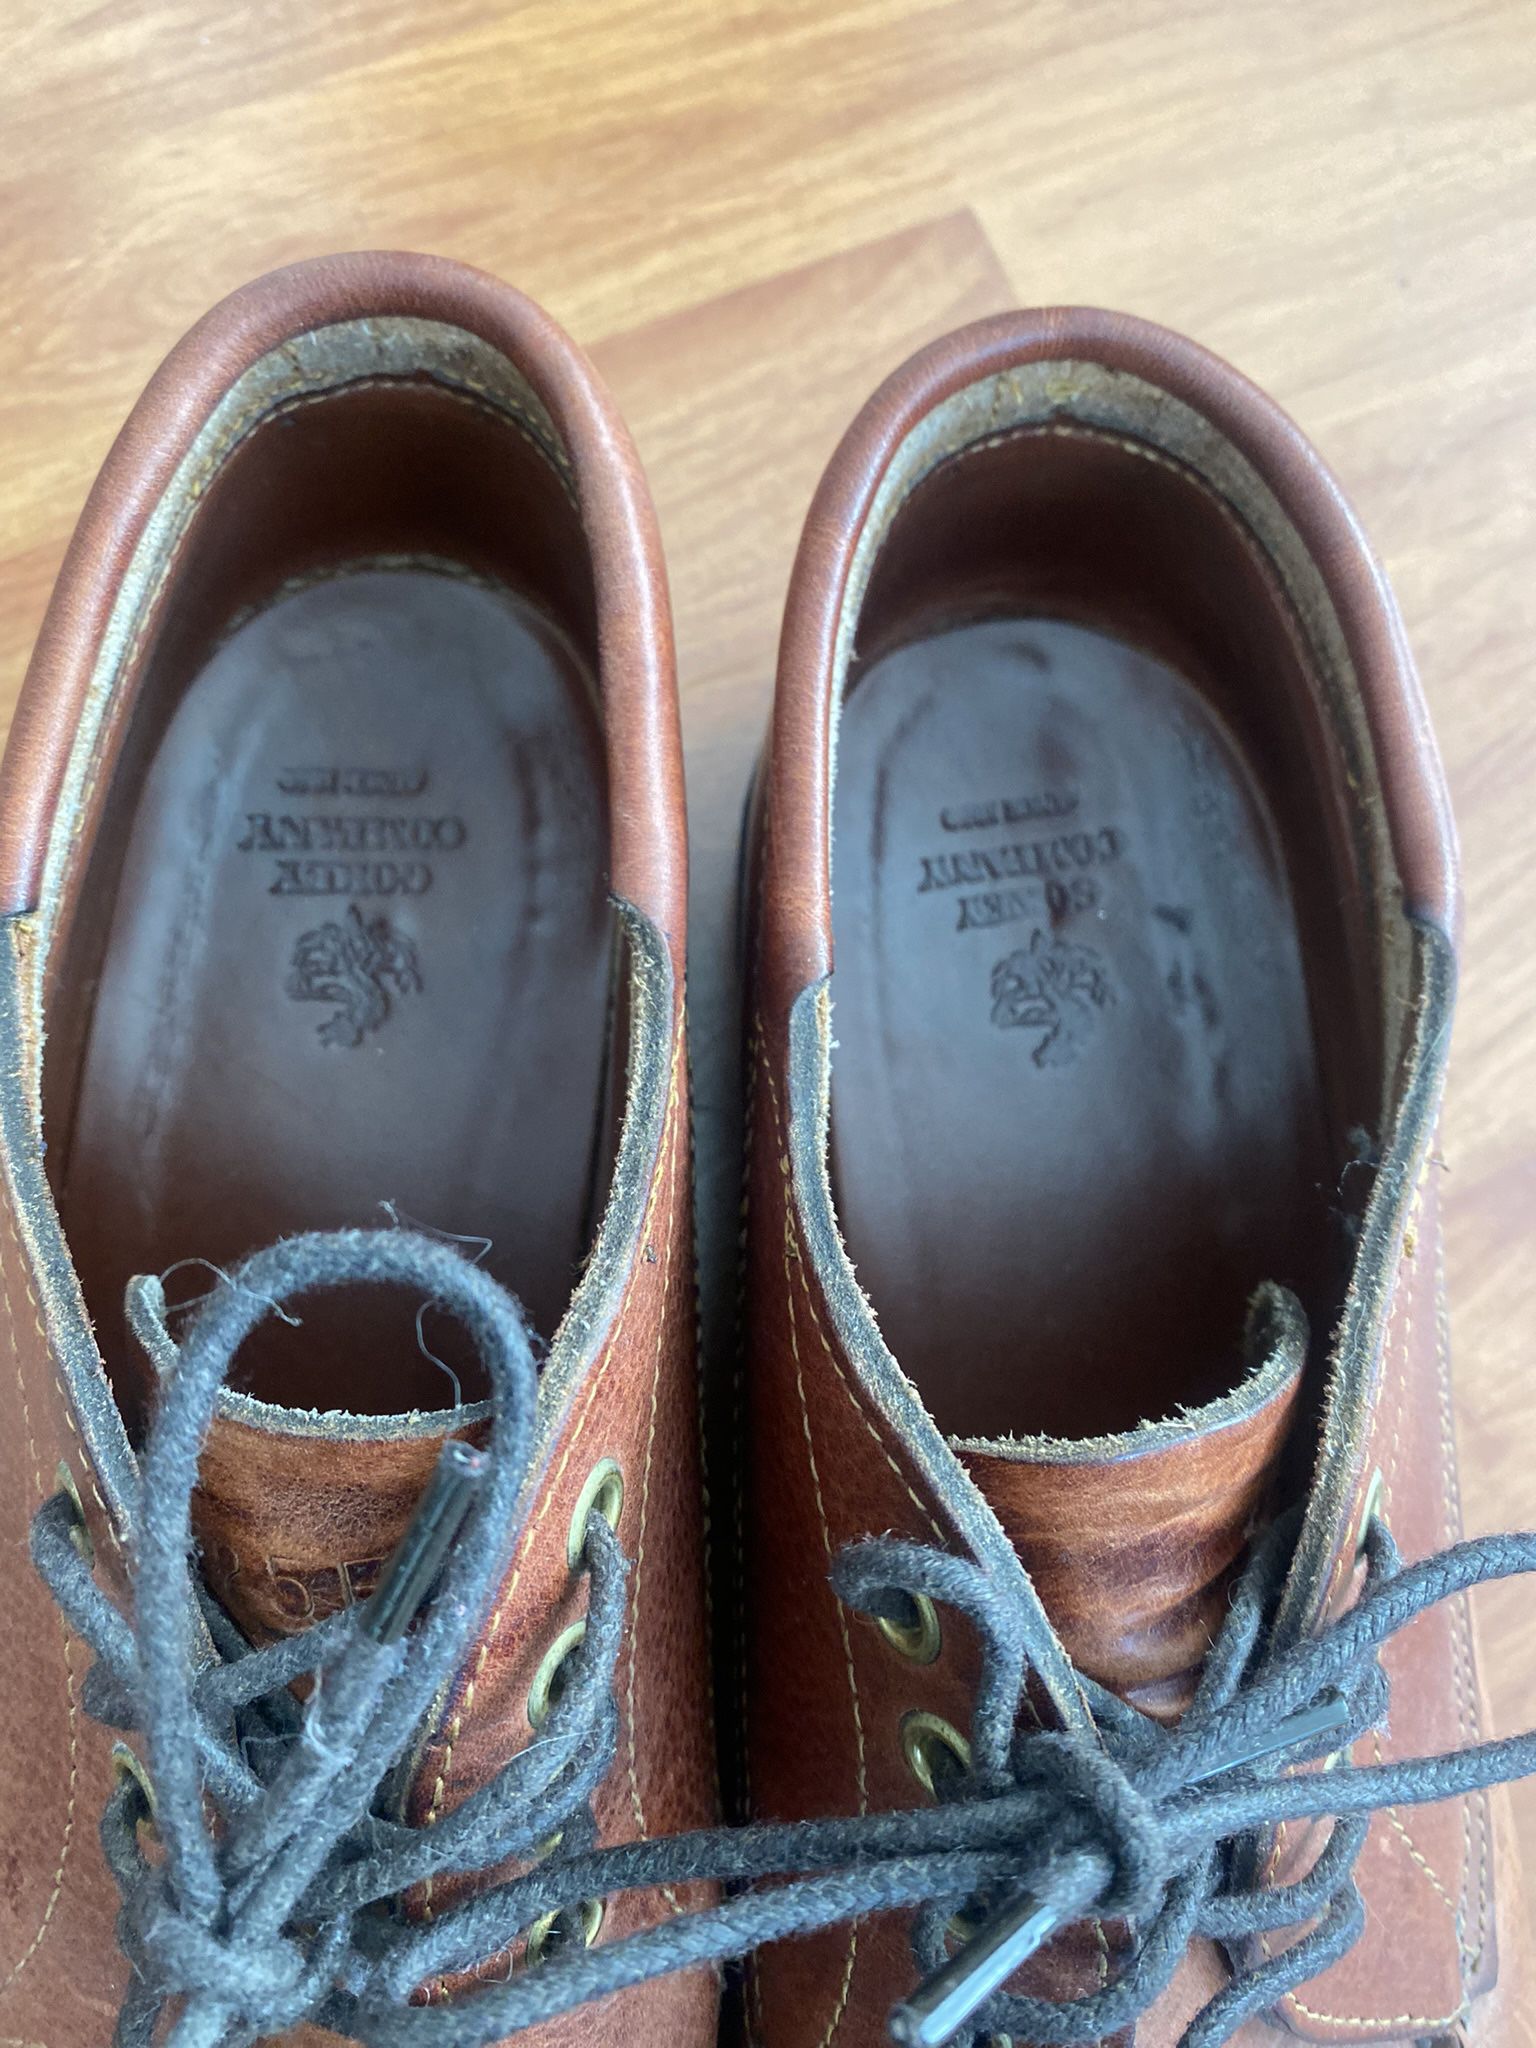 GOKEY Orvis Mens Bison Leather Sauvage Oxford Camp Shoes Vibram Sole Size  12.5 E. Make an offer! 7-8 oz. bull hide uppers Full leather mid sole  Remove for Sale in New York,